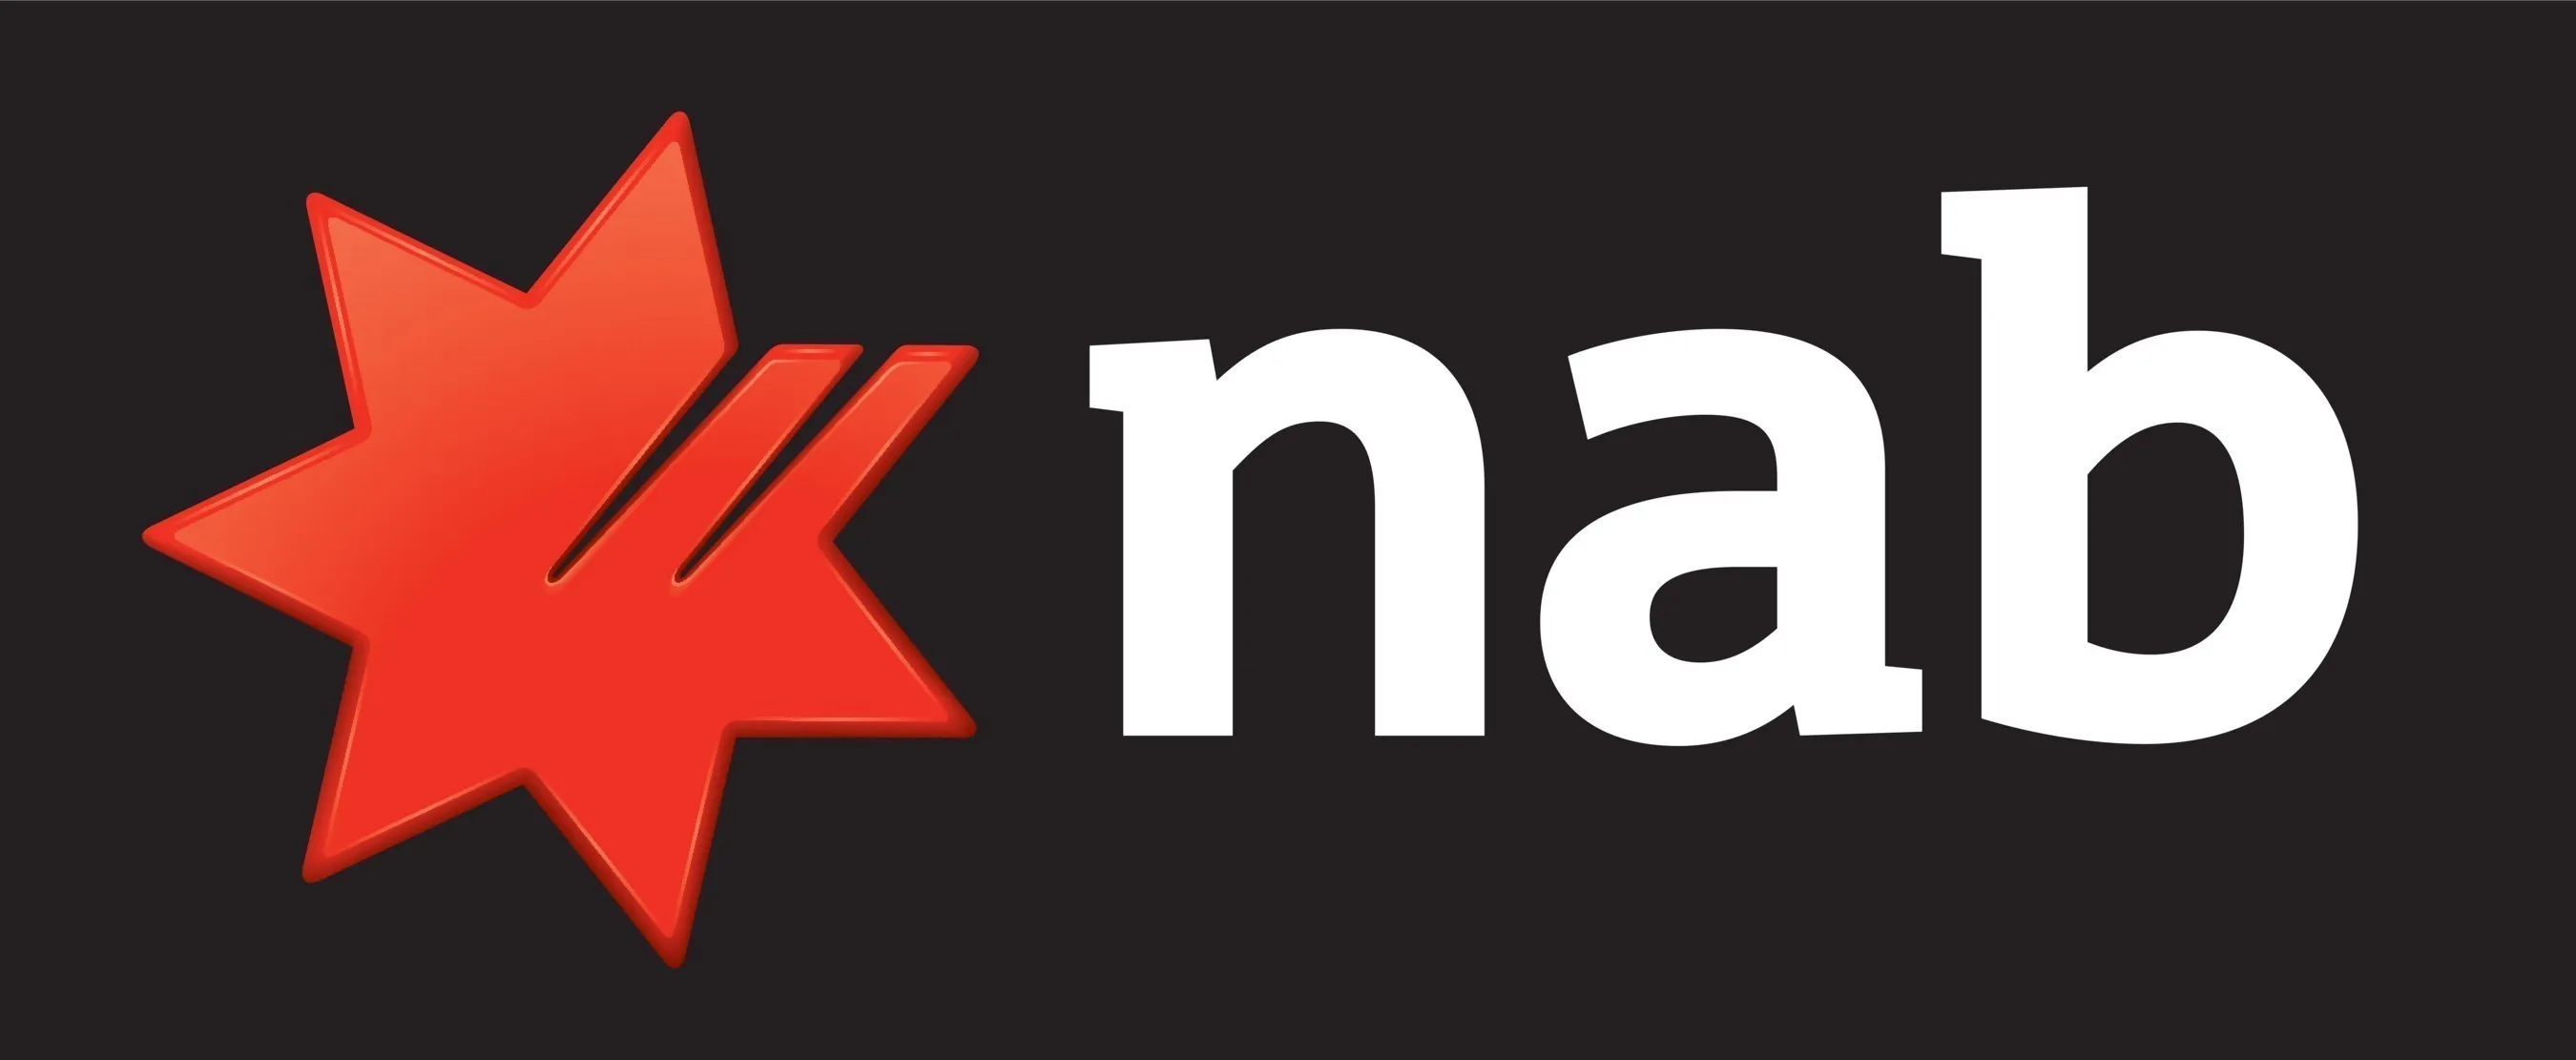 NAB Credit Cards - Compare offers and read reviews | finder.com.au